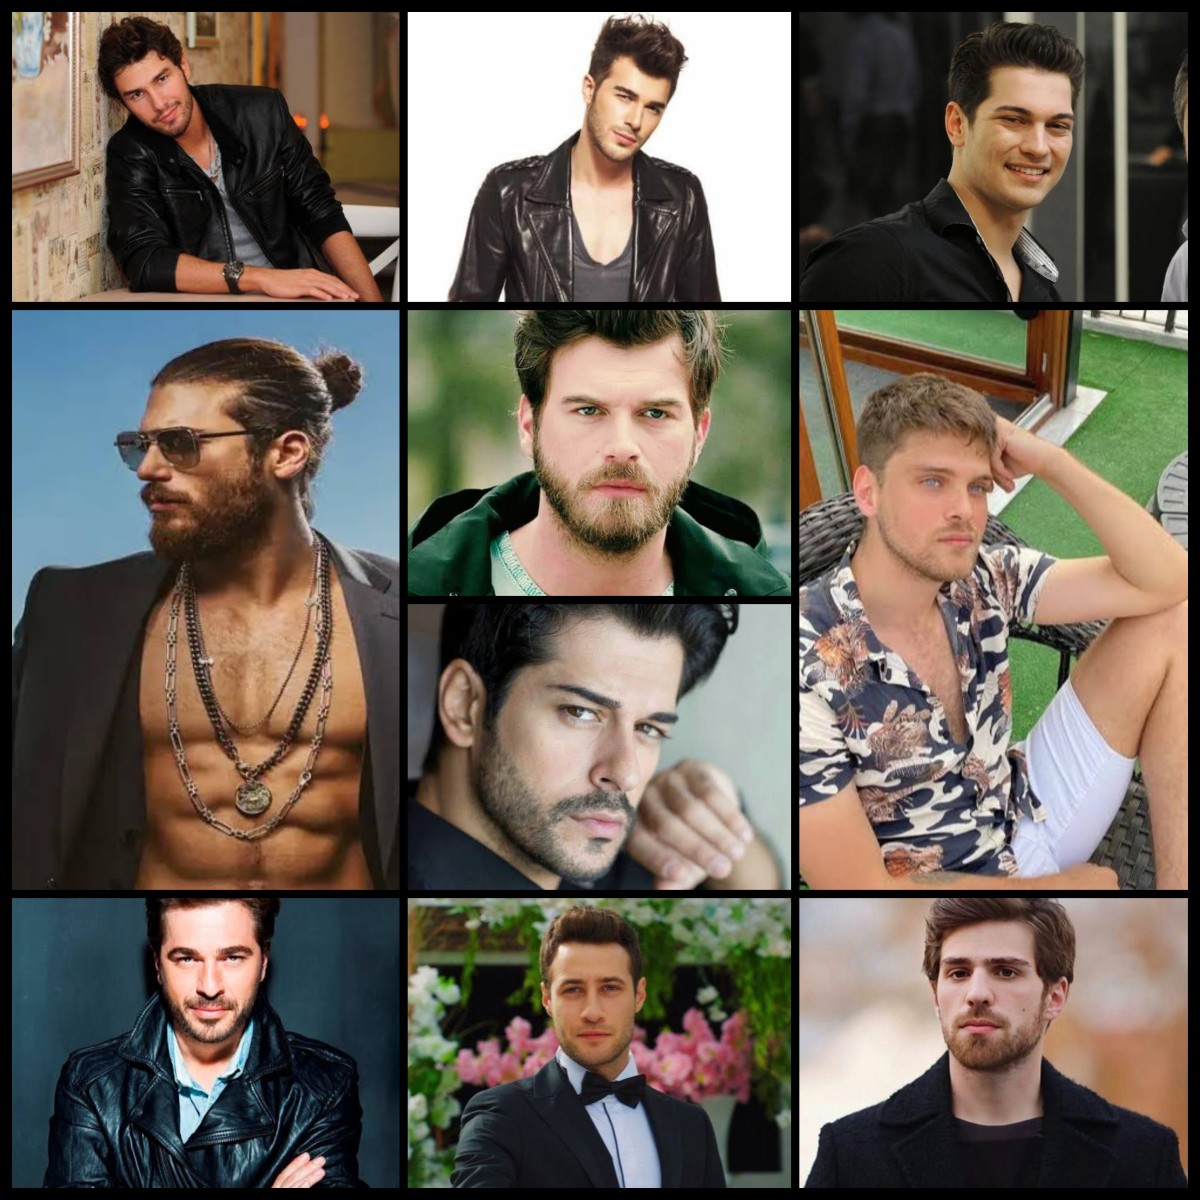 From Kivanc Tatlitug to Cagatay Ulusoy, here are the 10 handsomest Turkish actors.